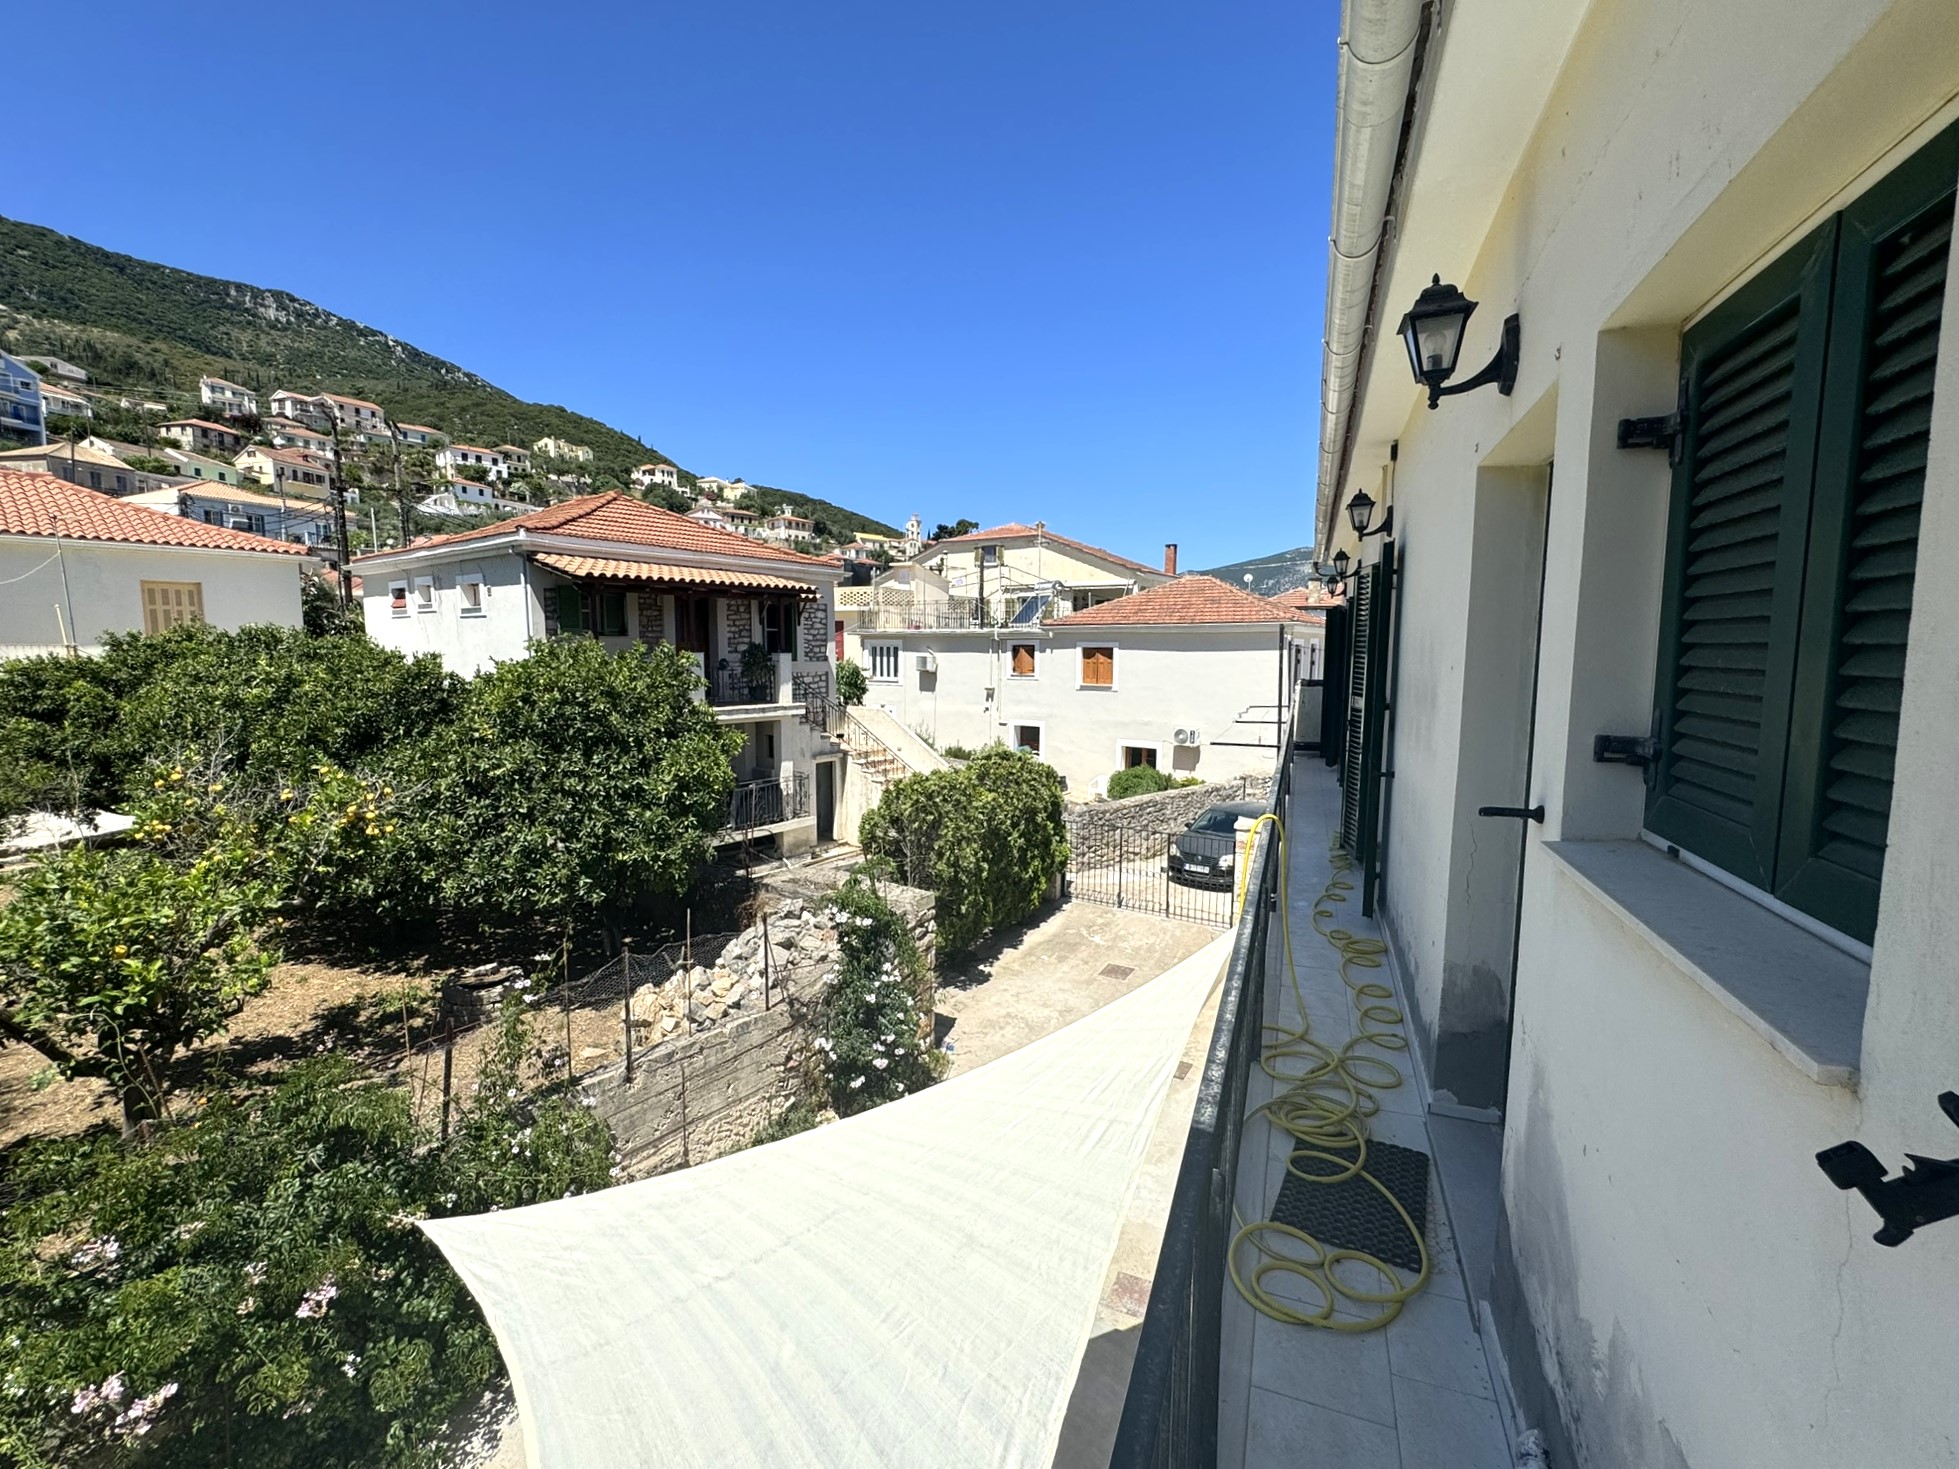 Balcony of house for sale in Ithaca Greece Vathi